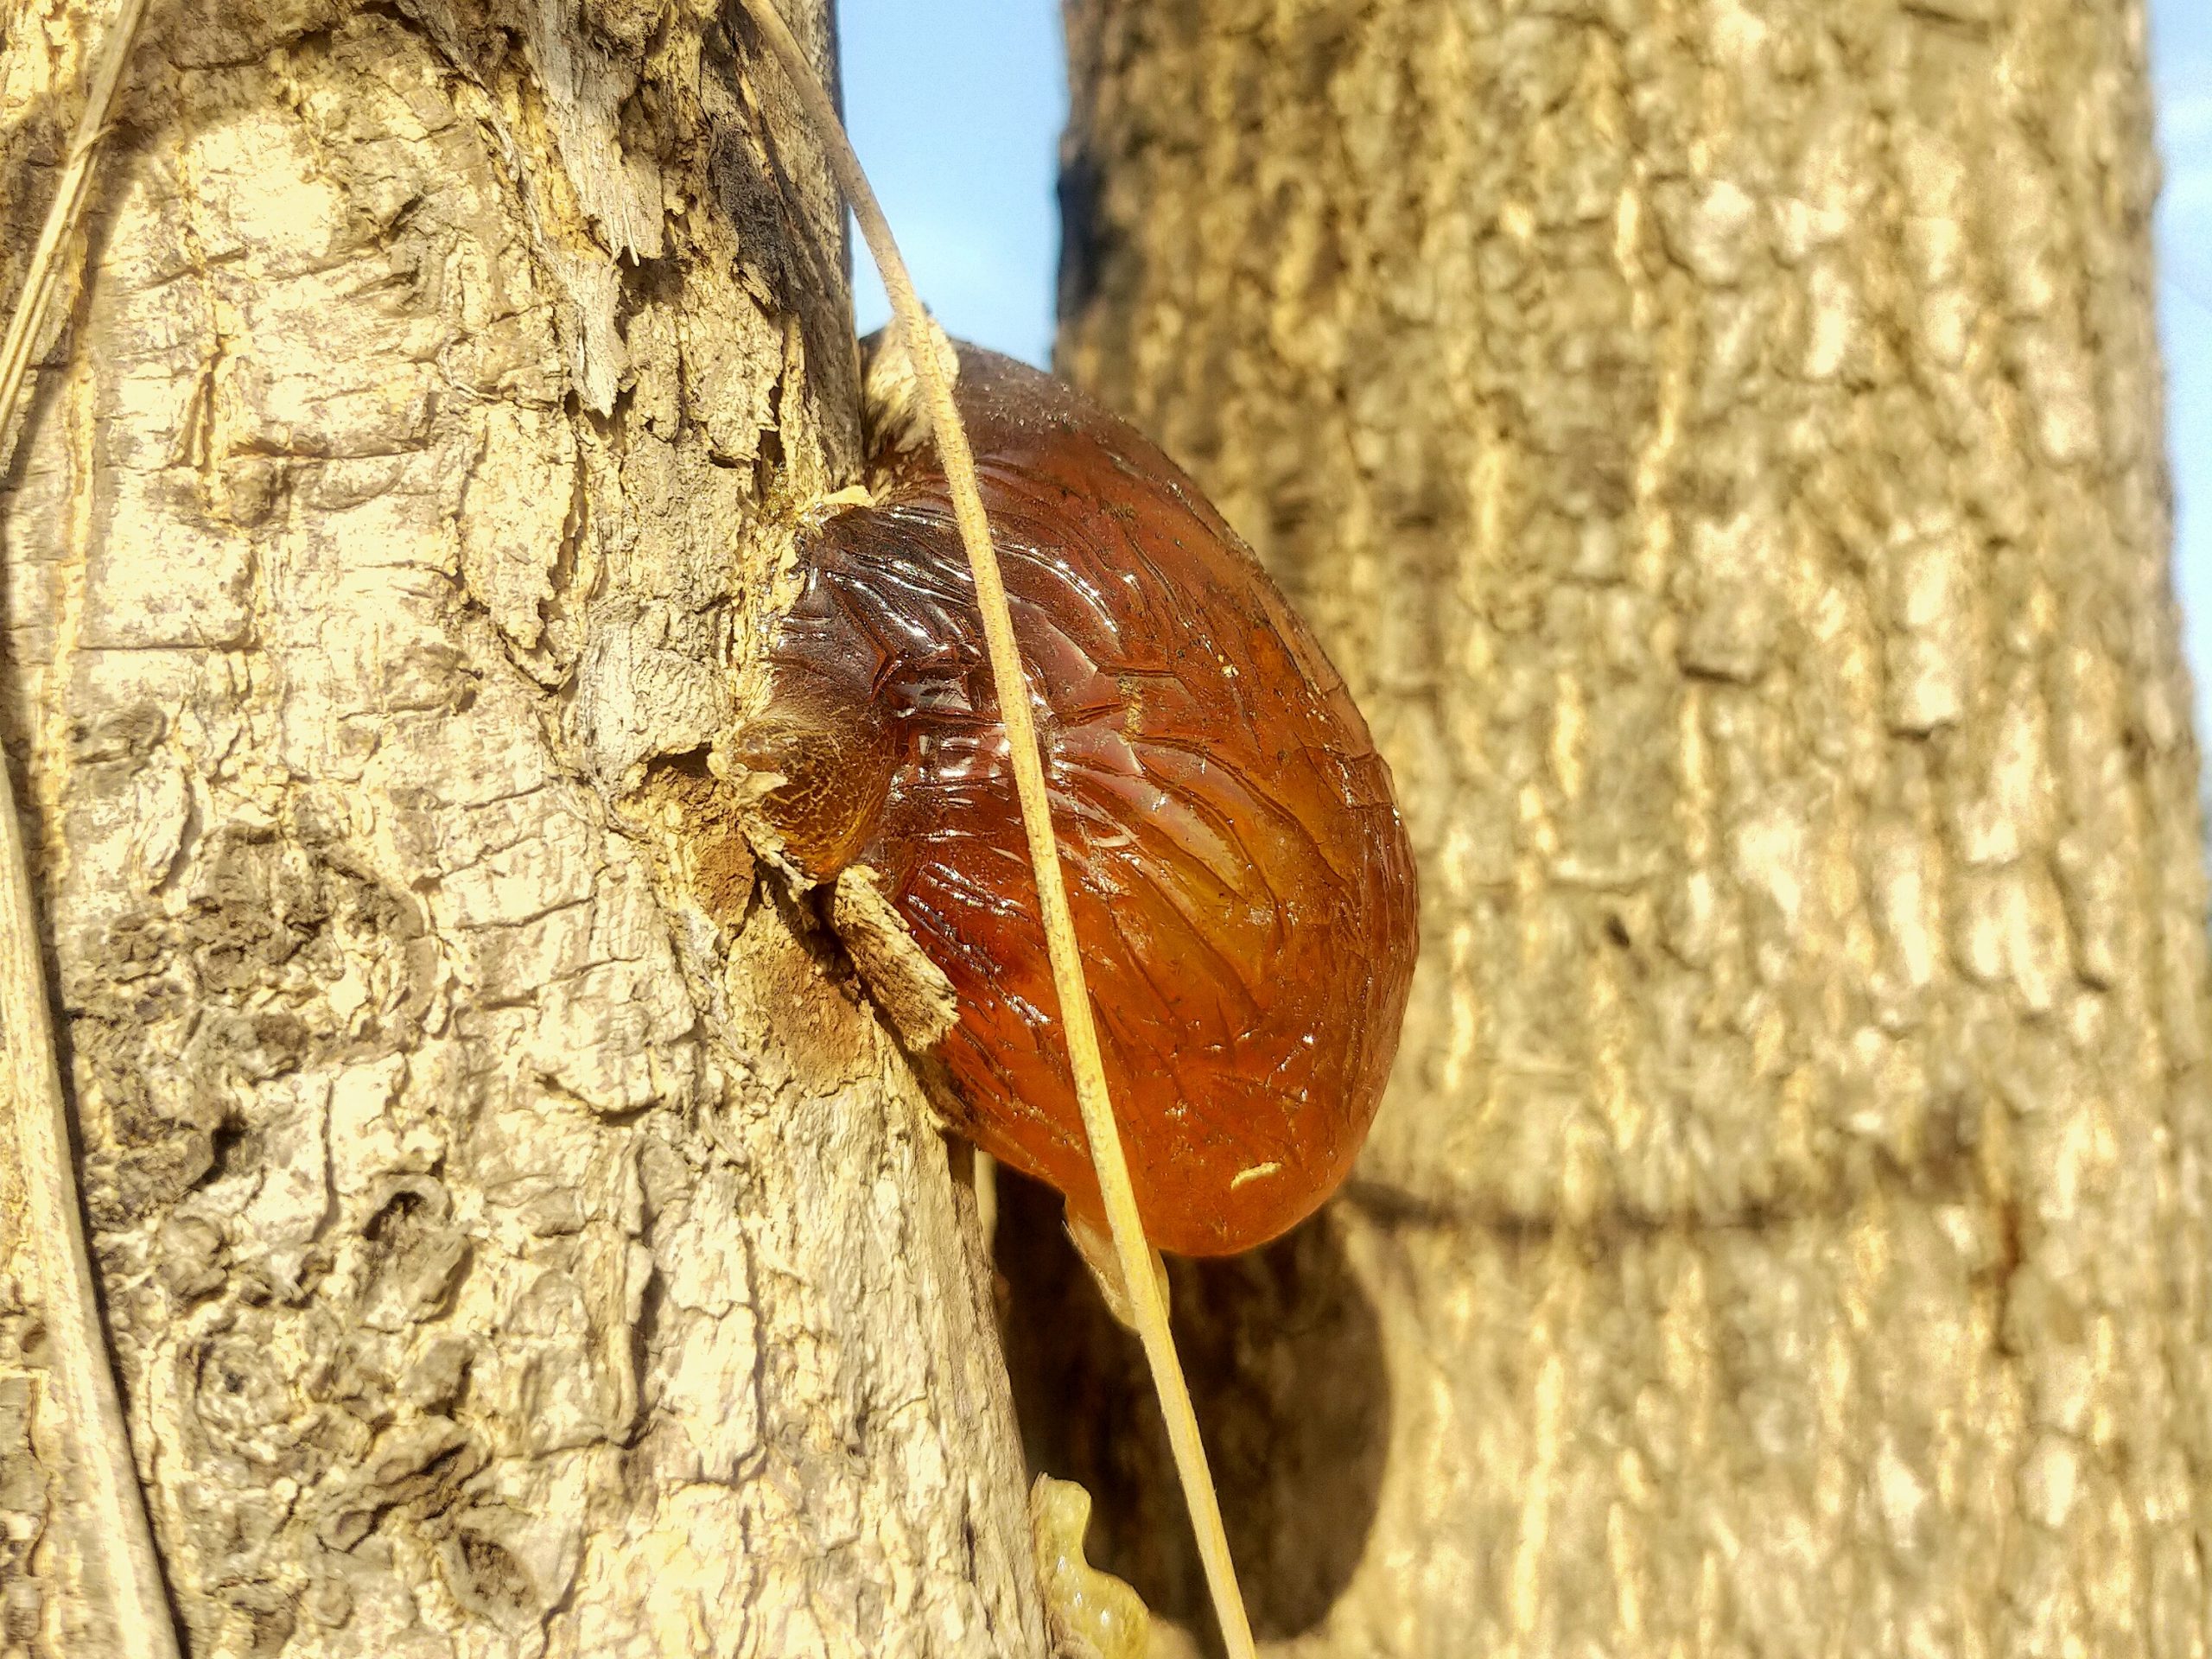 A sticky material on a tree bark